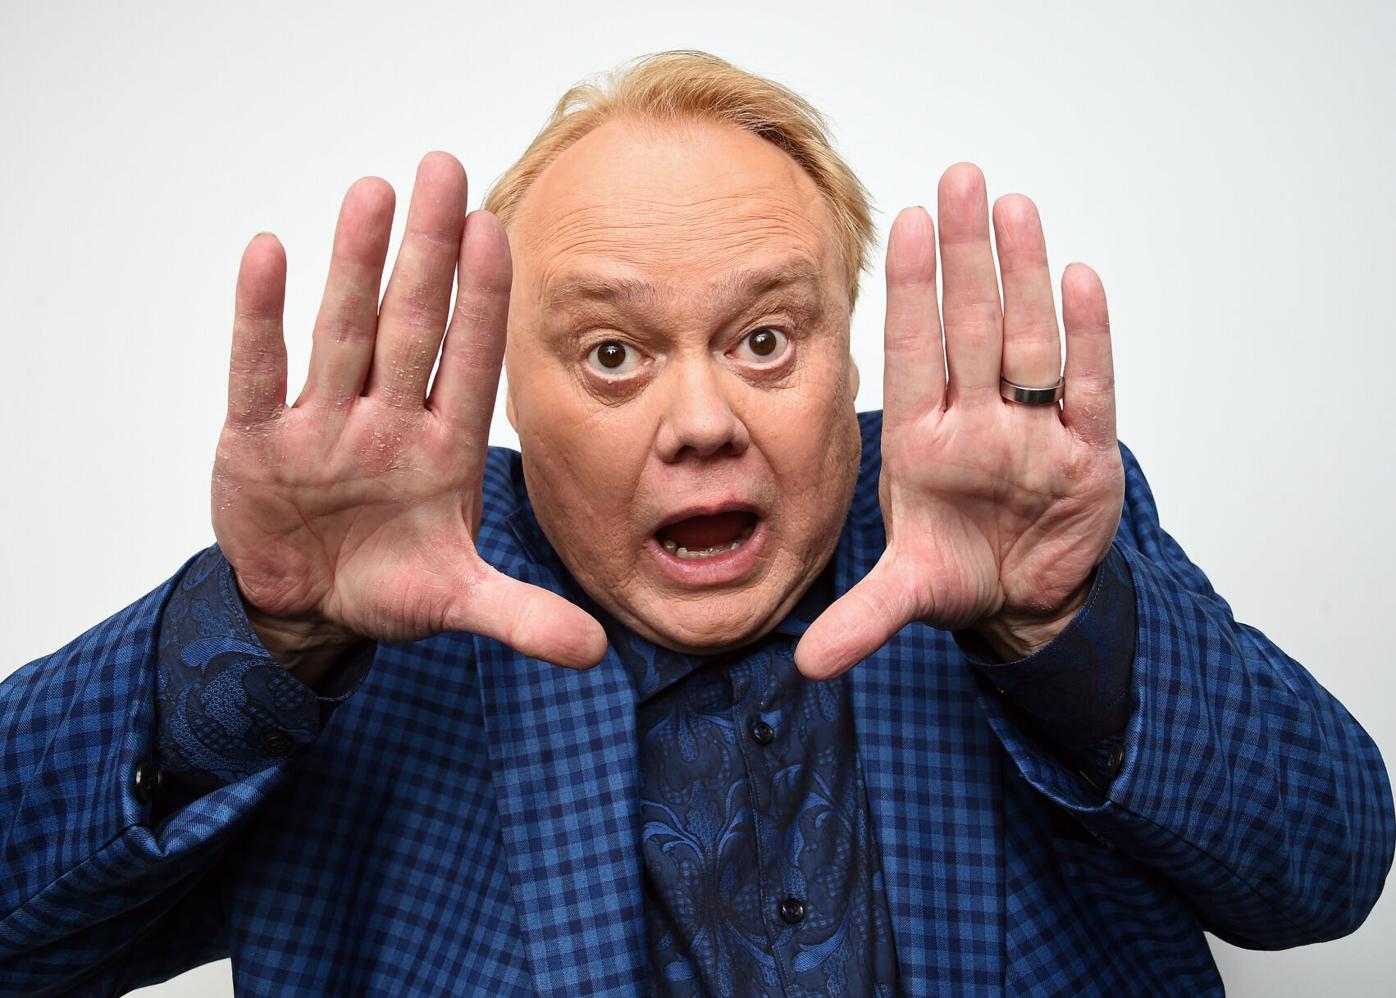 Coming 2 America Actor Louie Anderson Diagnosed With Cancer